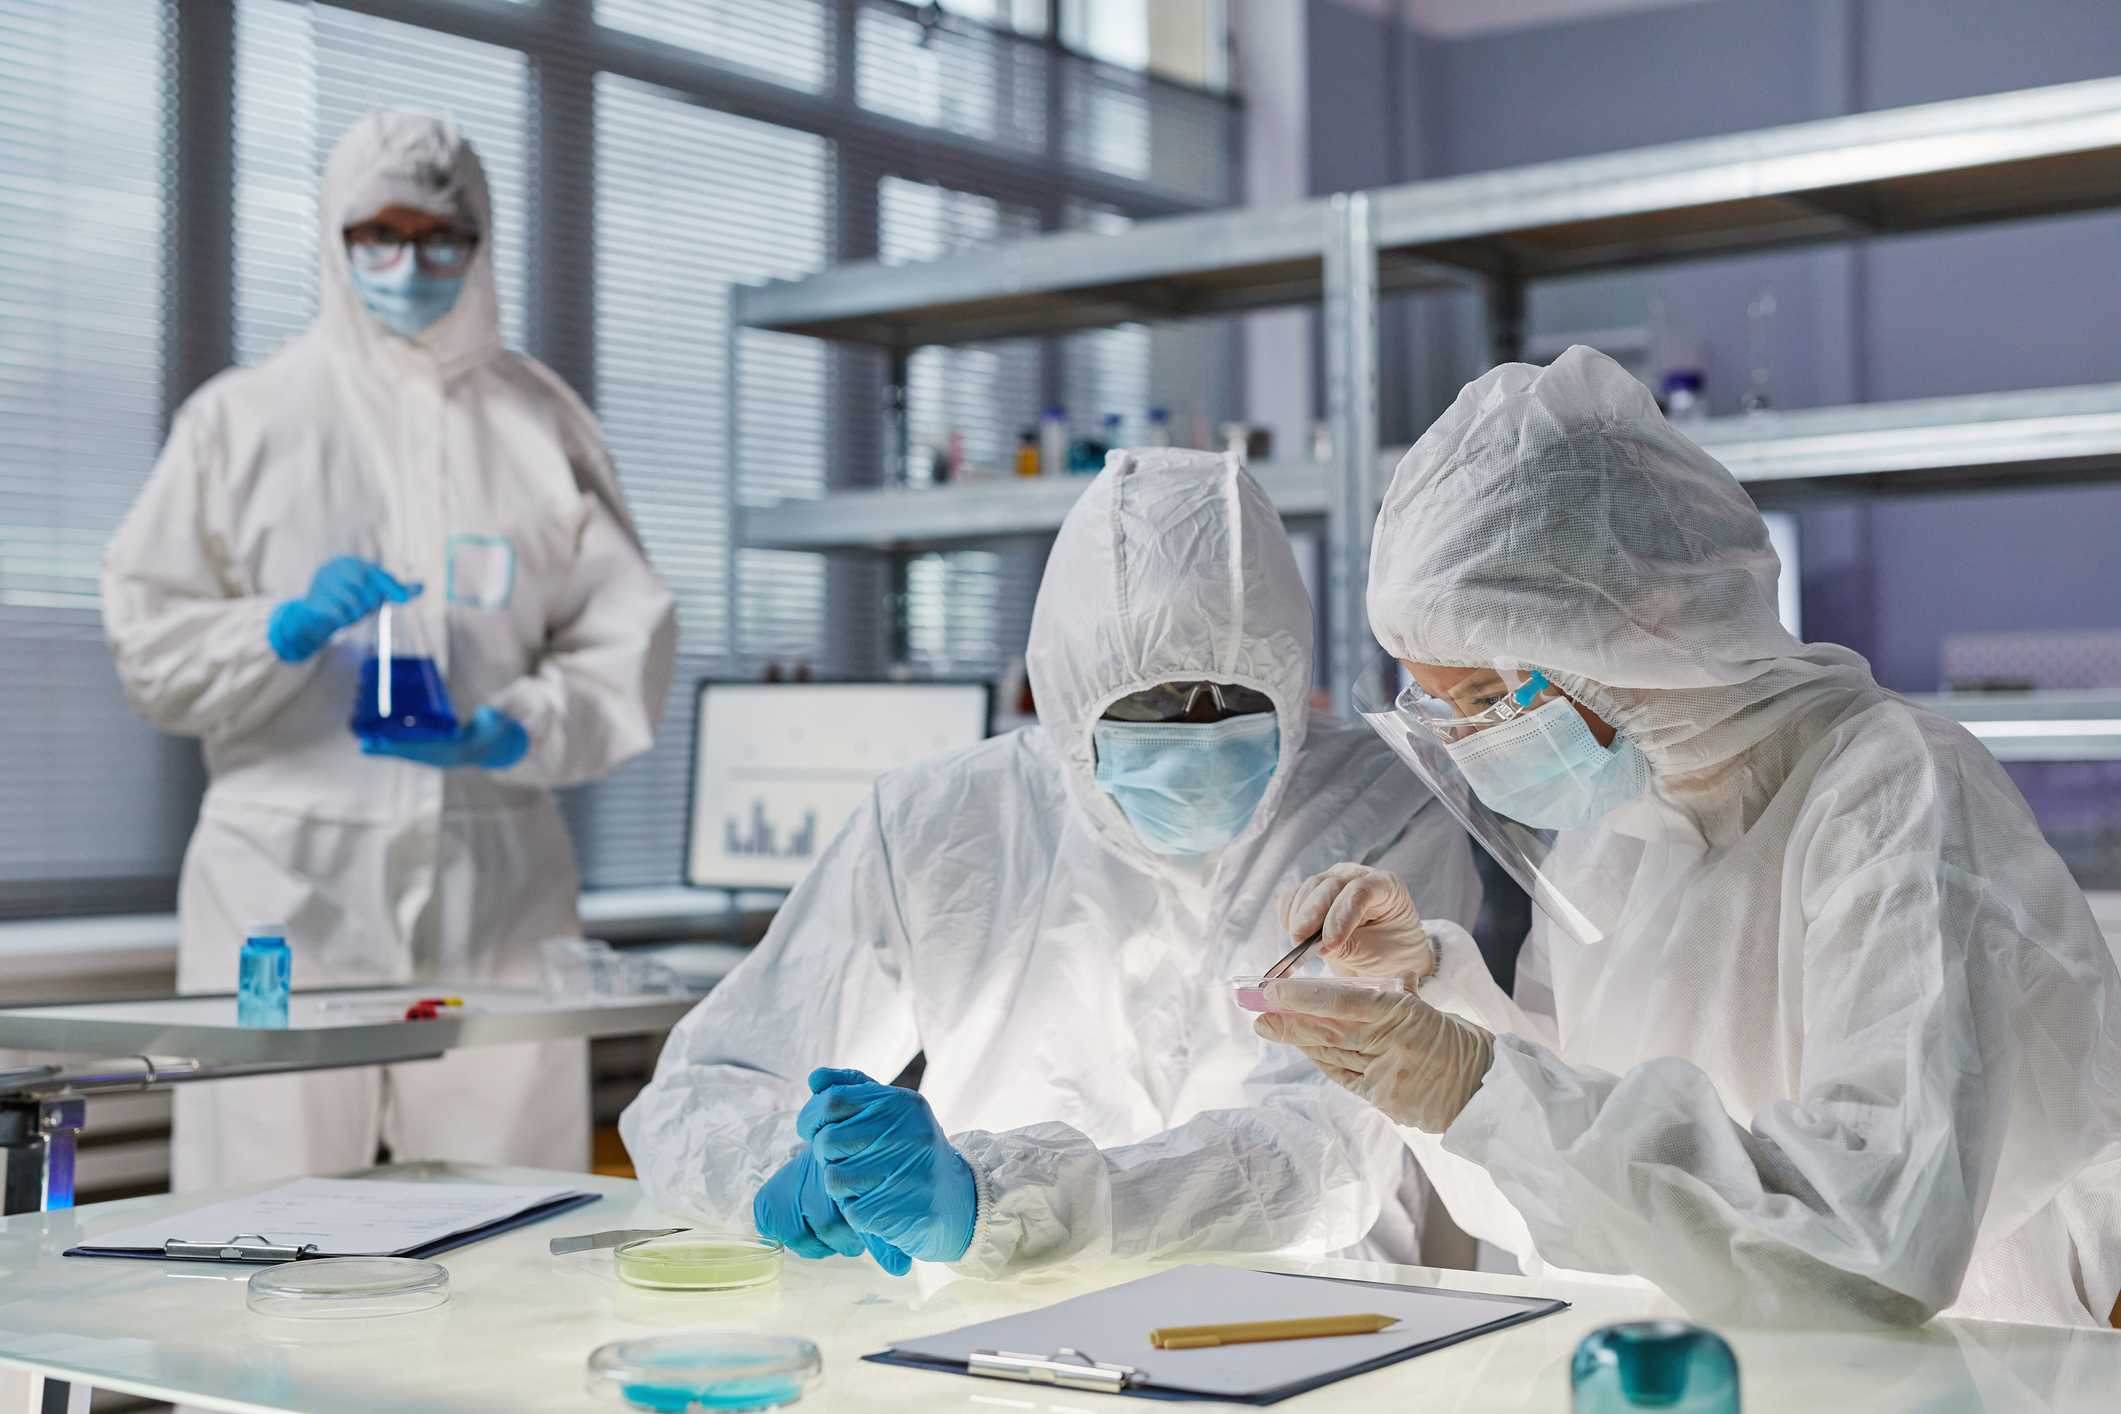 Group of people in protective suits working with chemicals in team in the laboratory